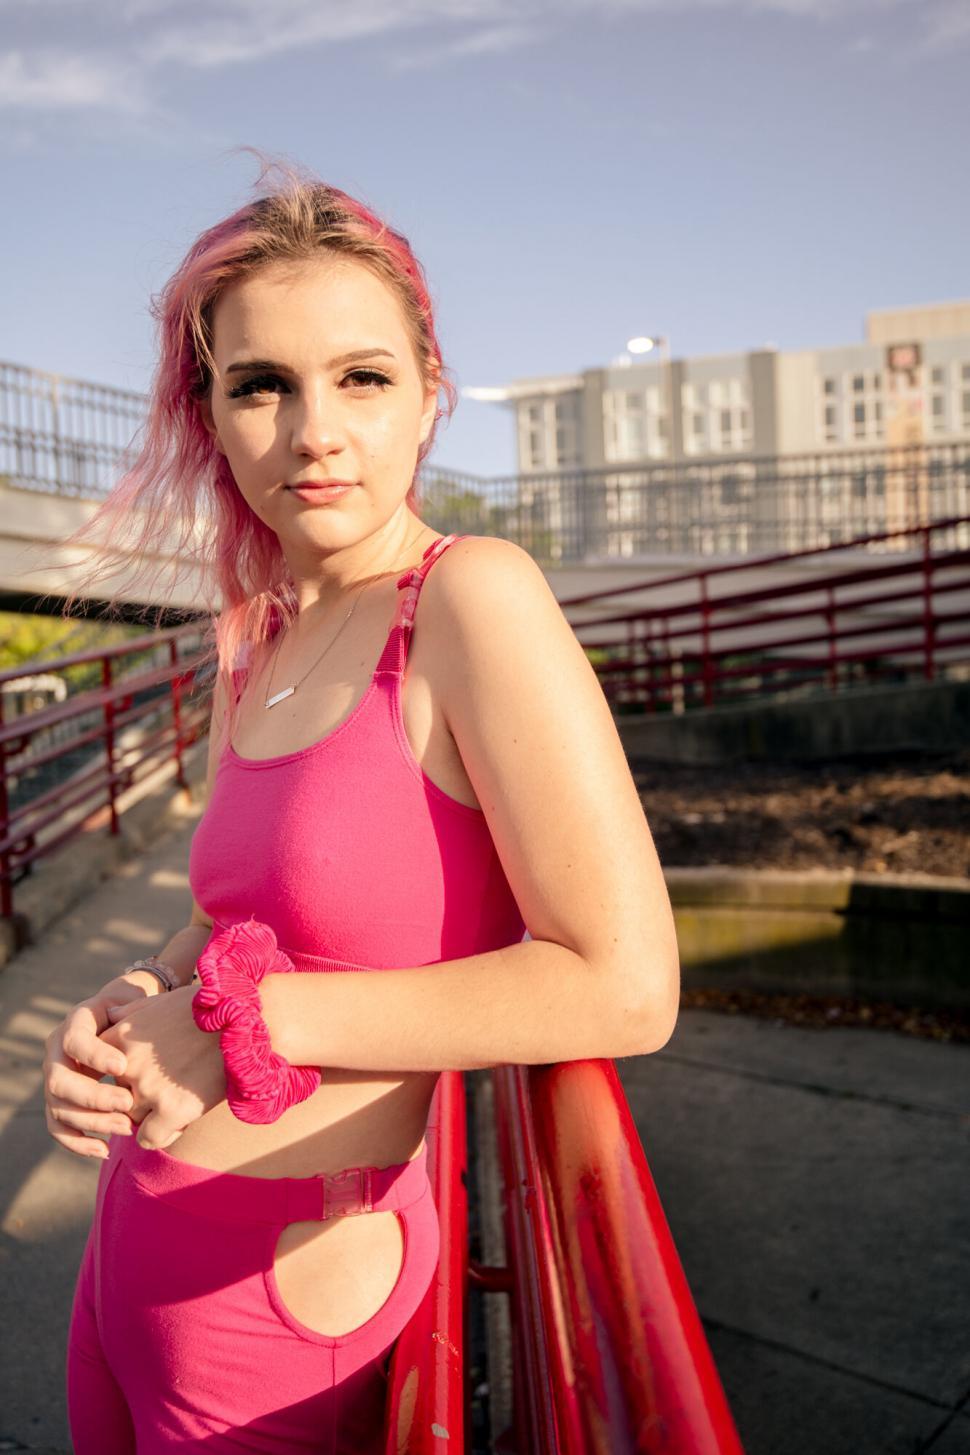 Free Image of Woman in pink outfit leaning on railing 